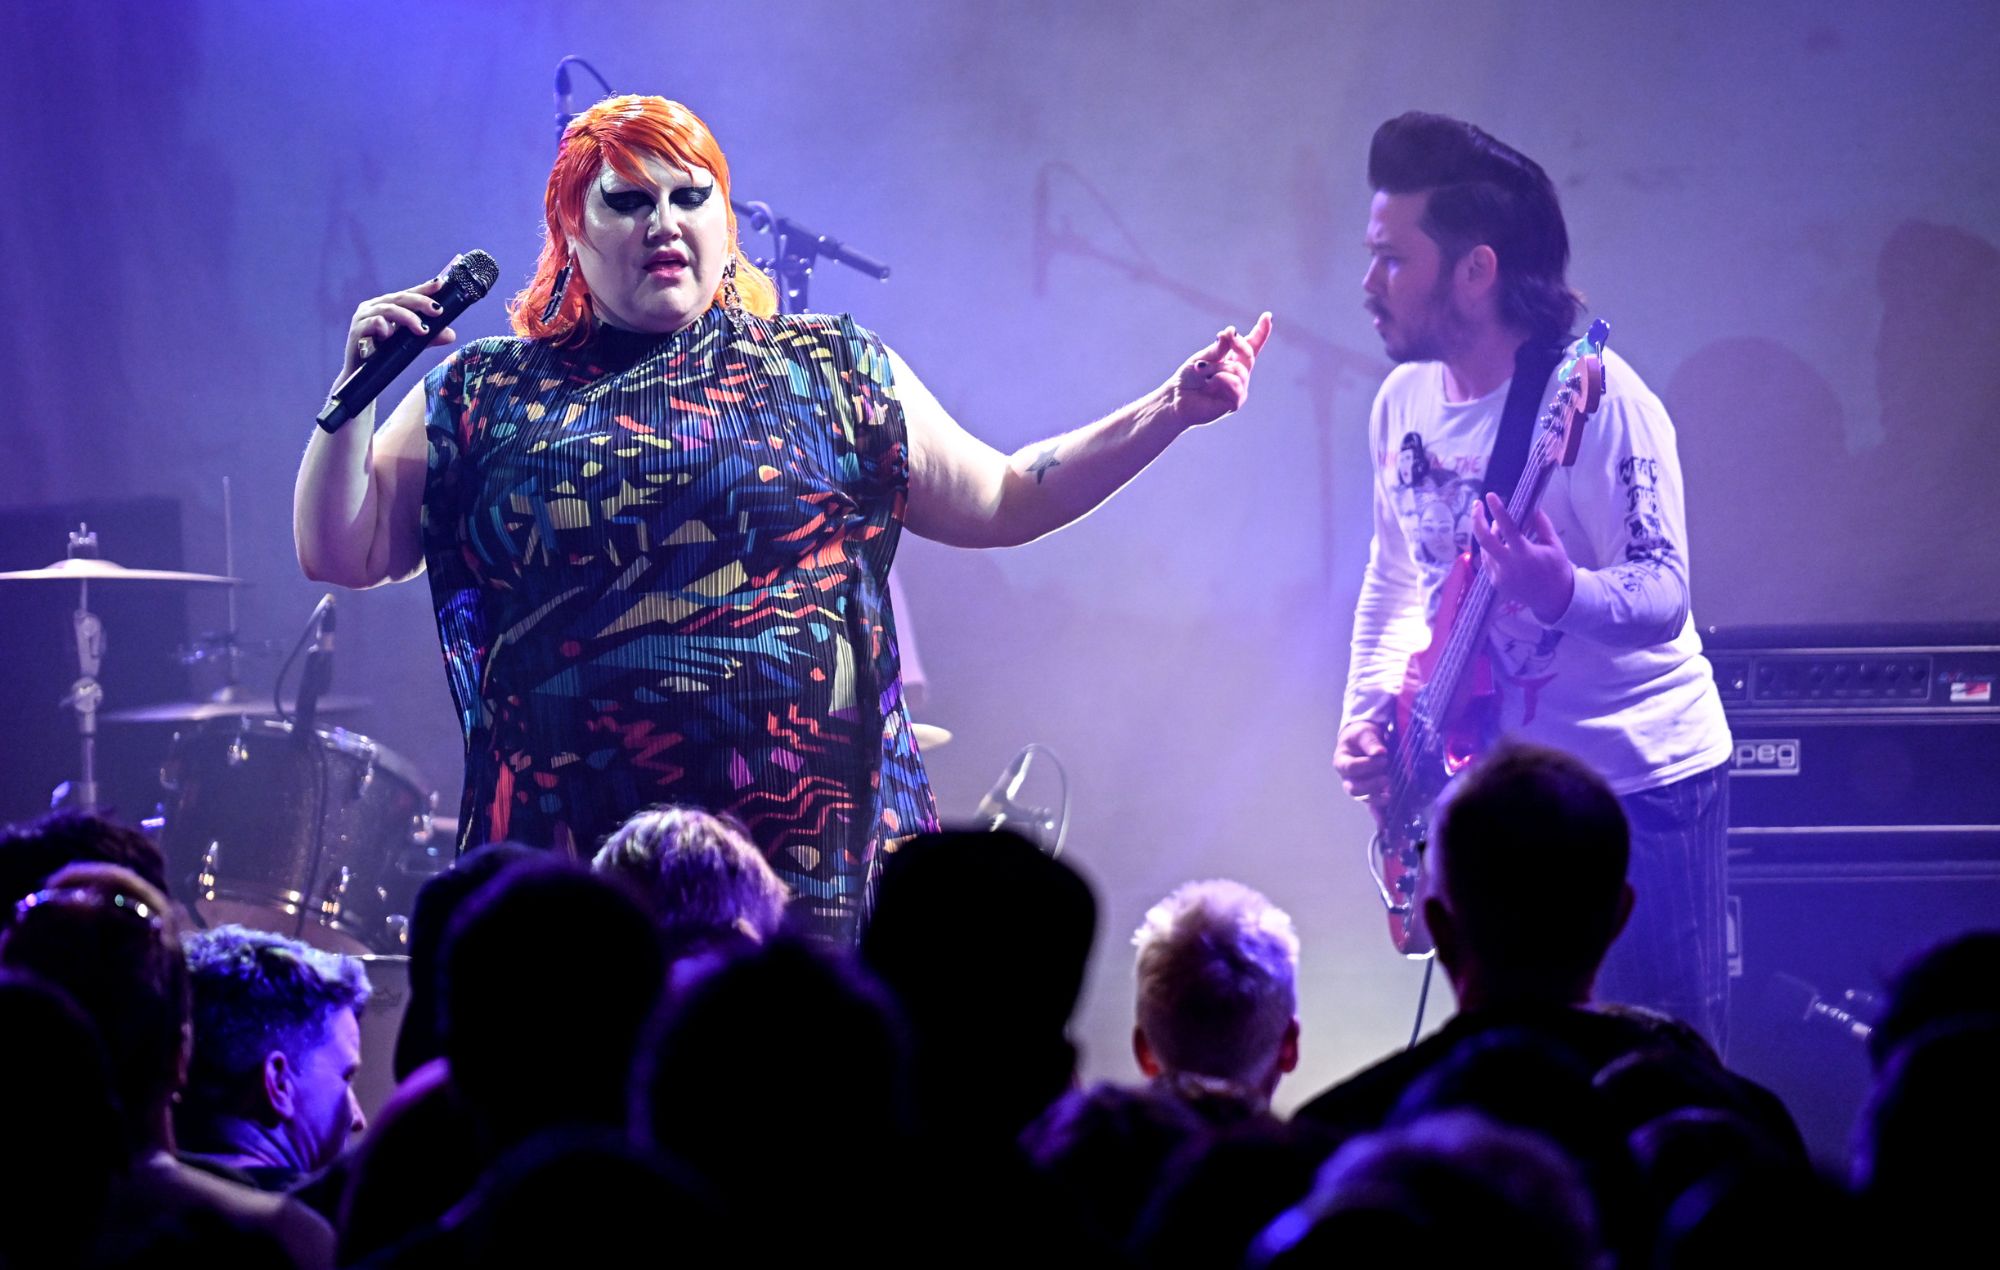 Beth Ditto and bassist Ted Kwo from the band Gossip take to the stage at the Lido. Photo: Britta Pedersen/dpa